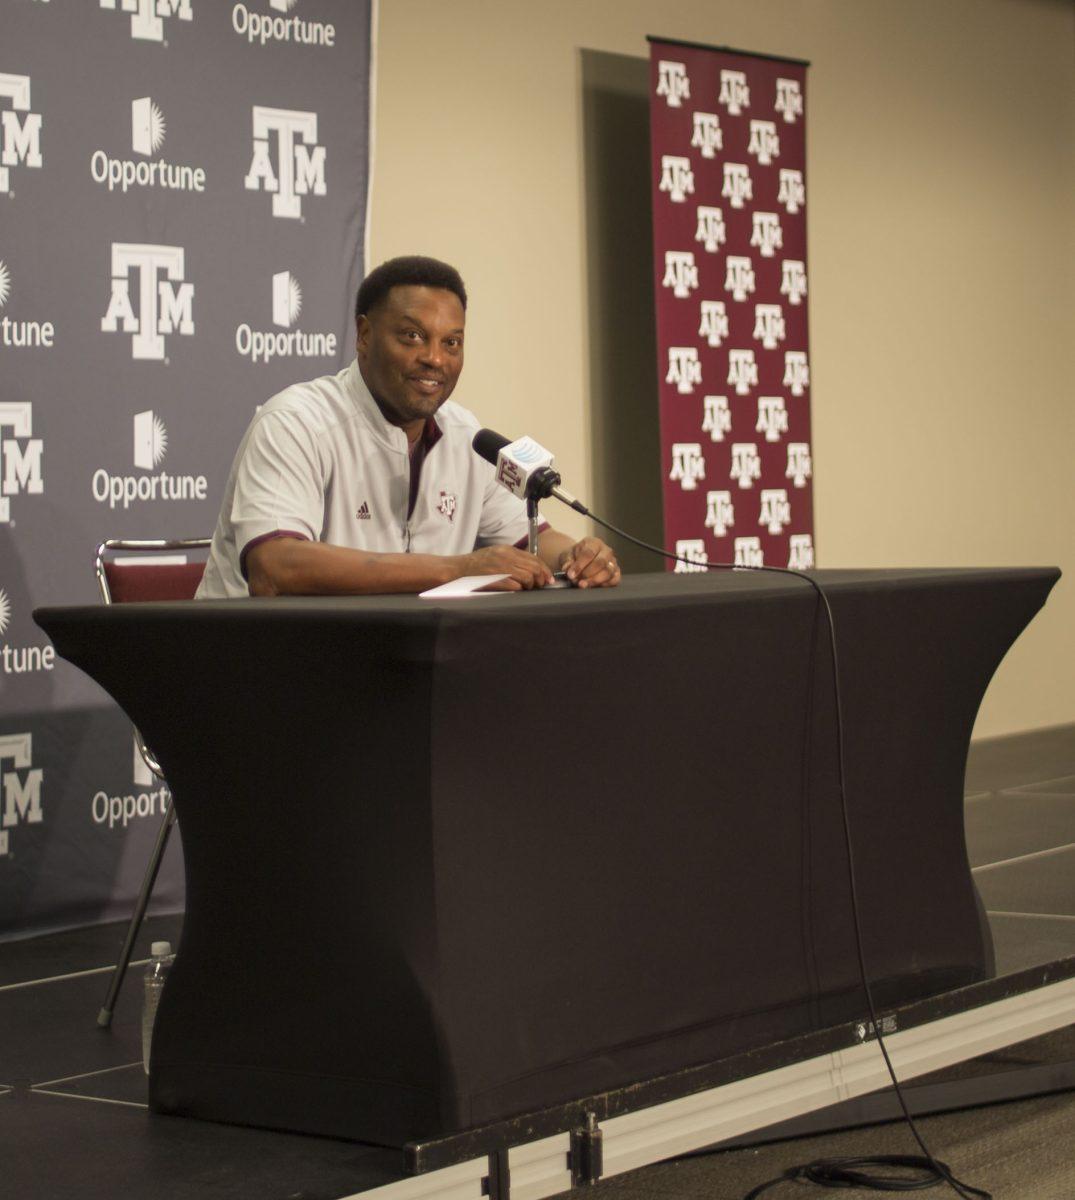 Coach+Sumlin+was+interviewed+on+Tuesday+during+the+Media+Press+Conference.